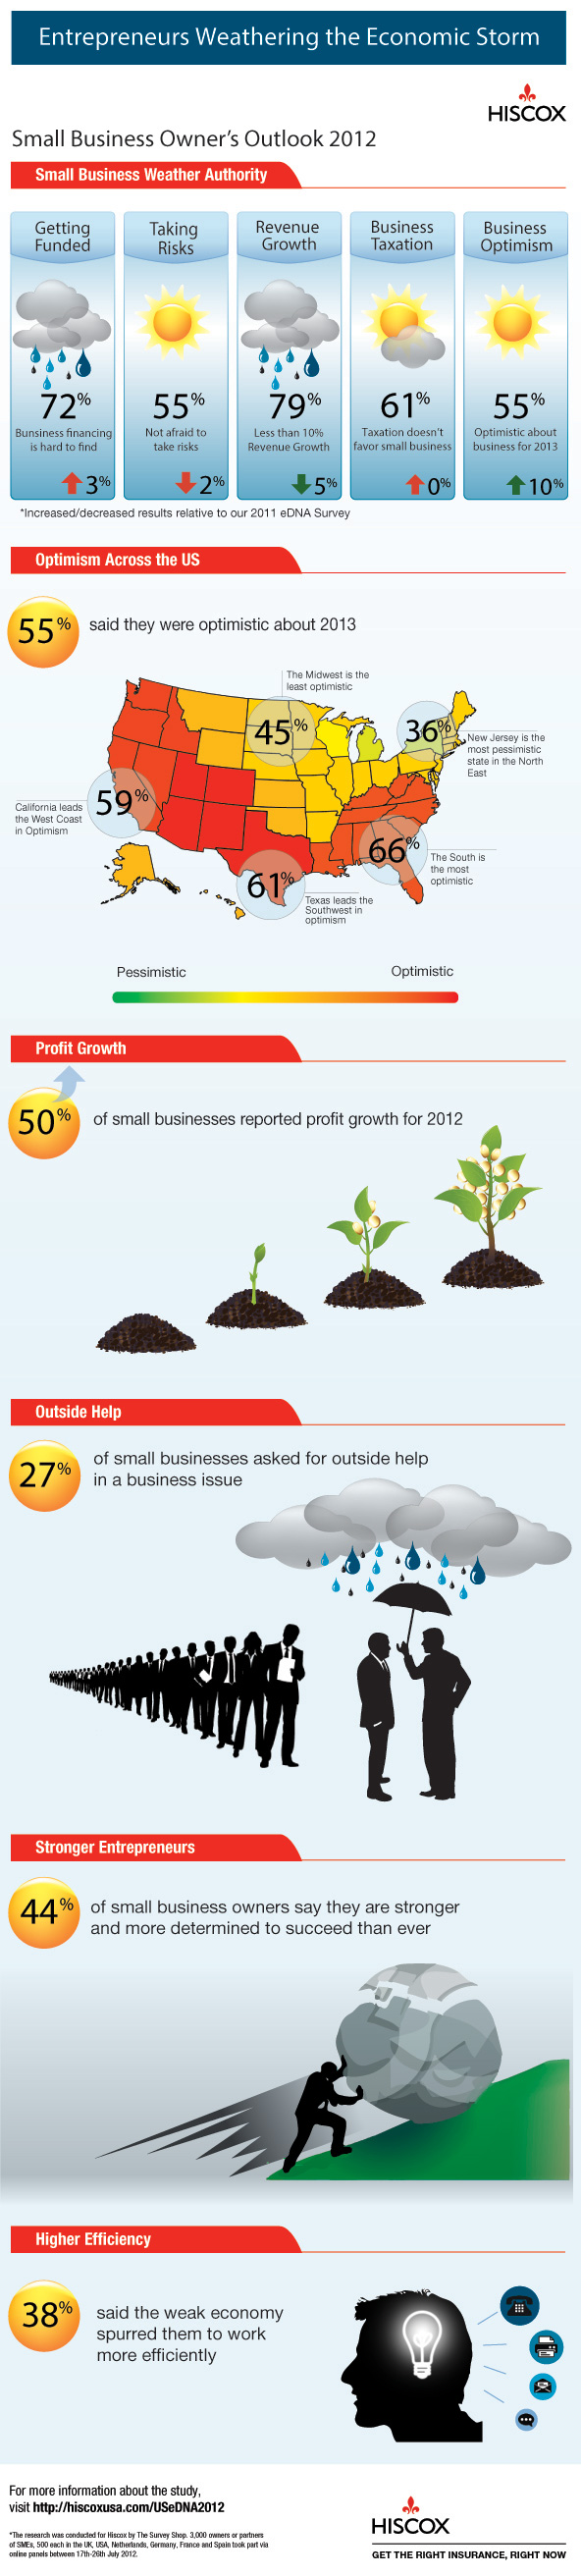 Small Business Owners Outlook 2012